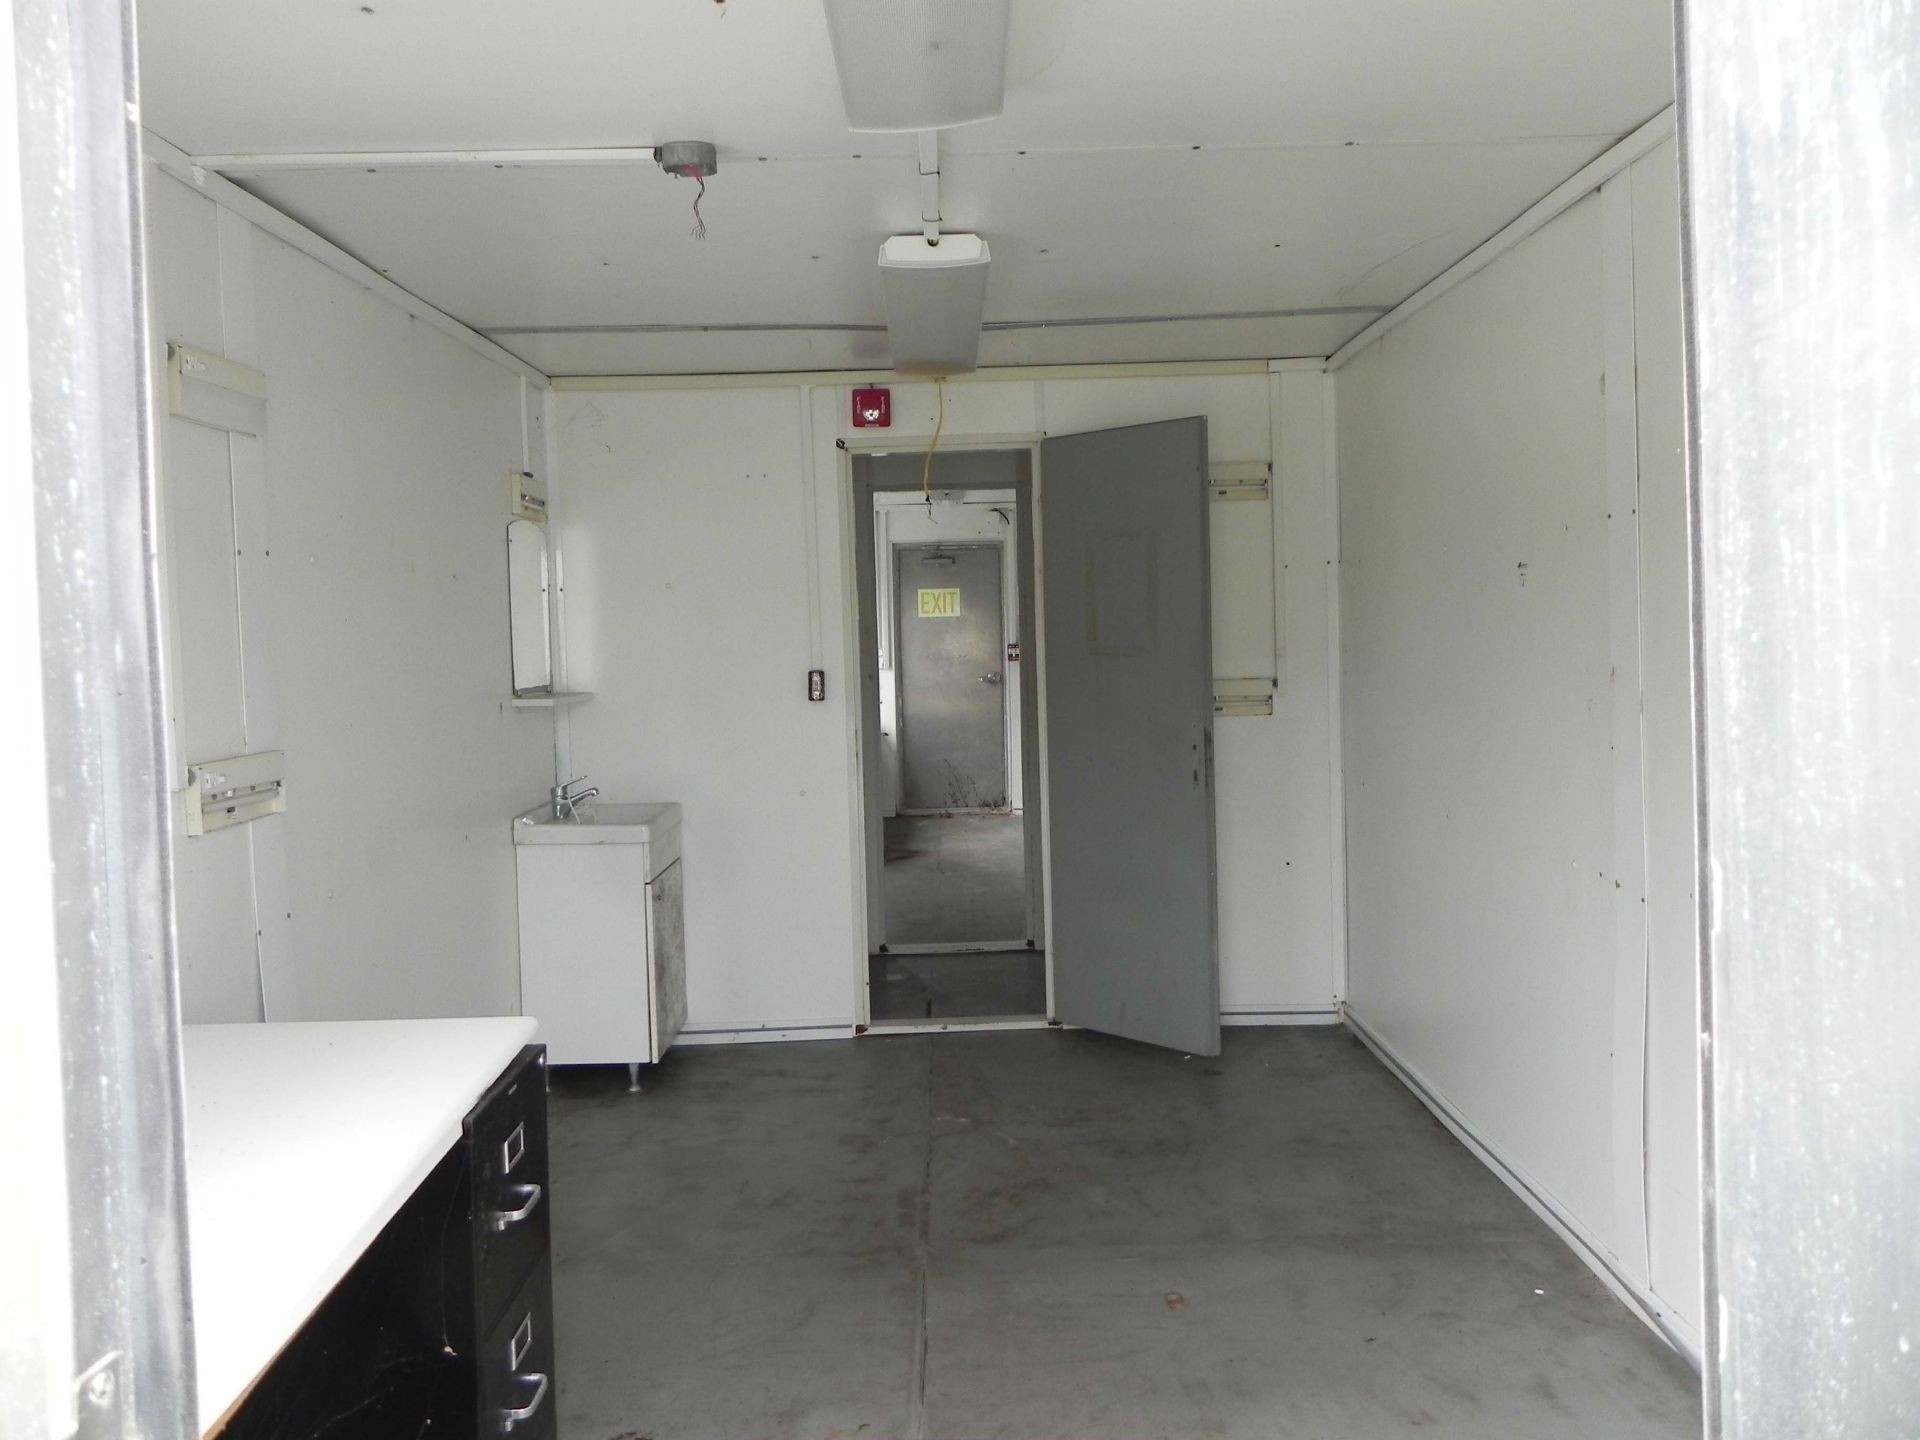 PORTABLE MAN CAMP LIVING QUARTERS, 10' x 32', 12-man sleeper unit, unit #6085. (Located offsite at - Image 2 of 4